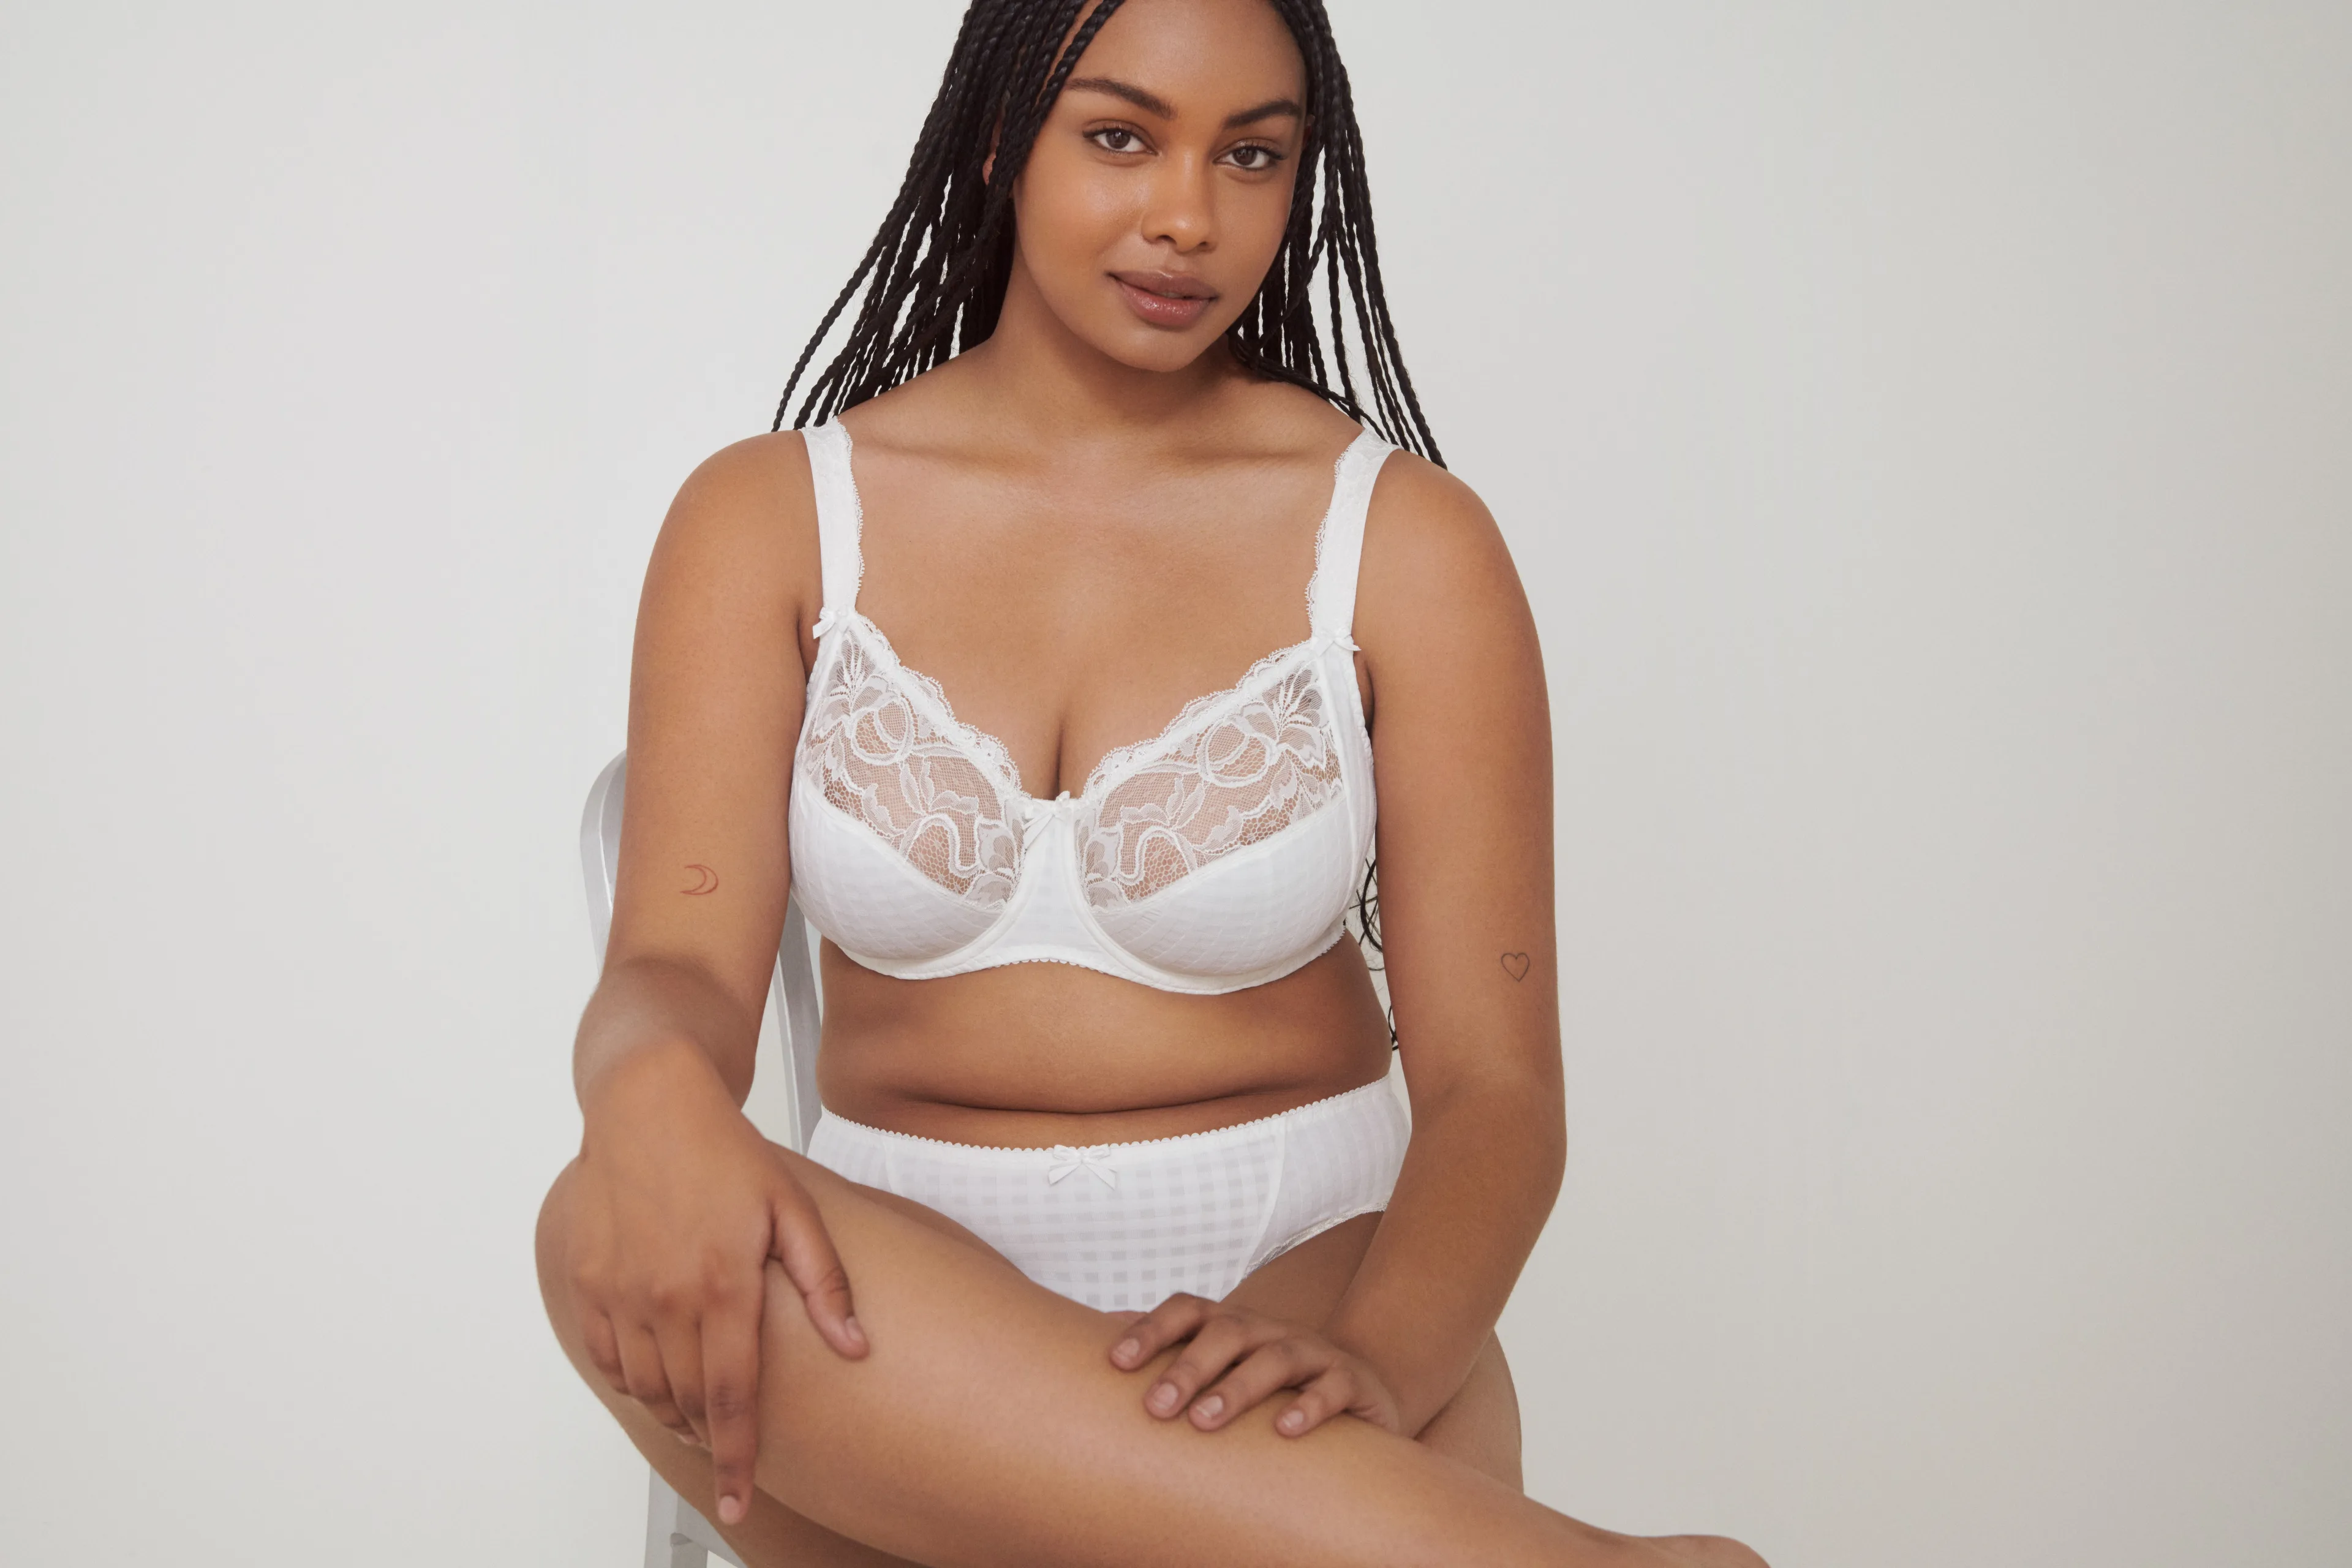 Bridal Lingerie: From Wedding Shapewear to Lingerie Sets